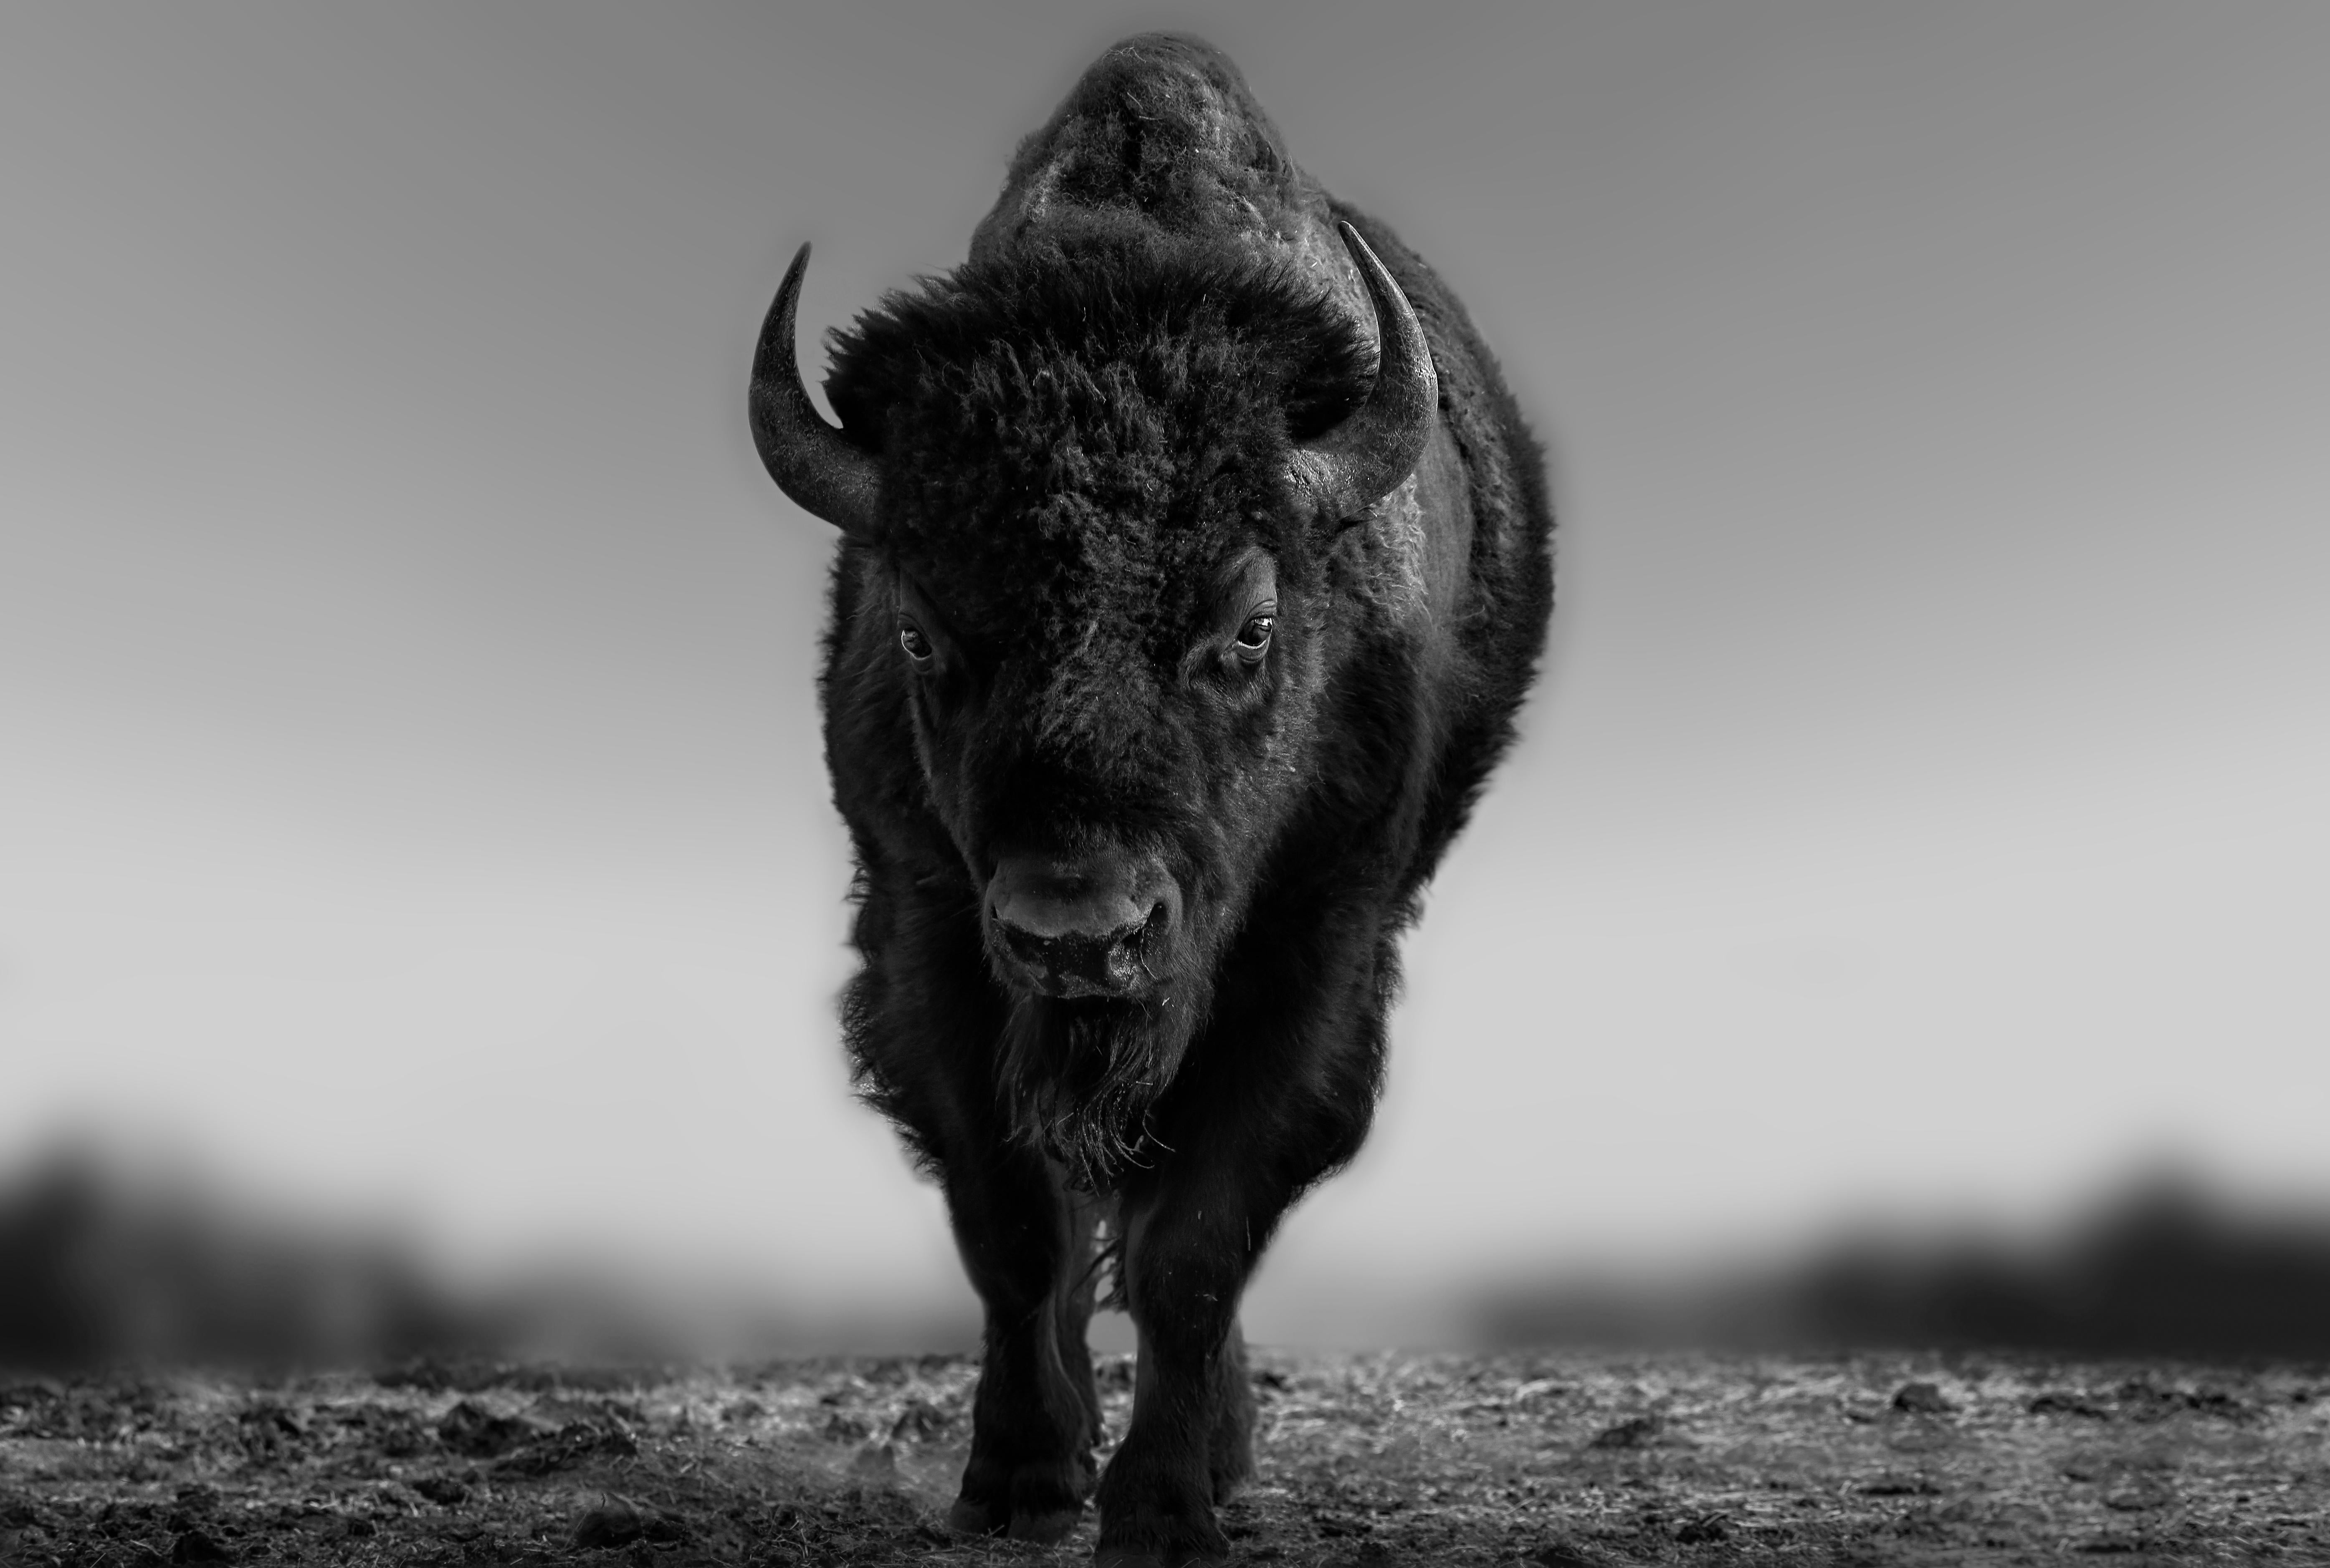 Shane Russeck Animal Print -  "The Beast" 28x40 - Black and White Photography of Bison, Buffalo Western Art